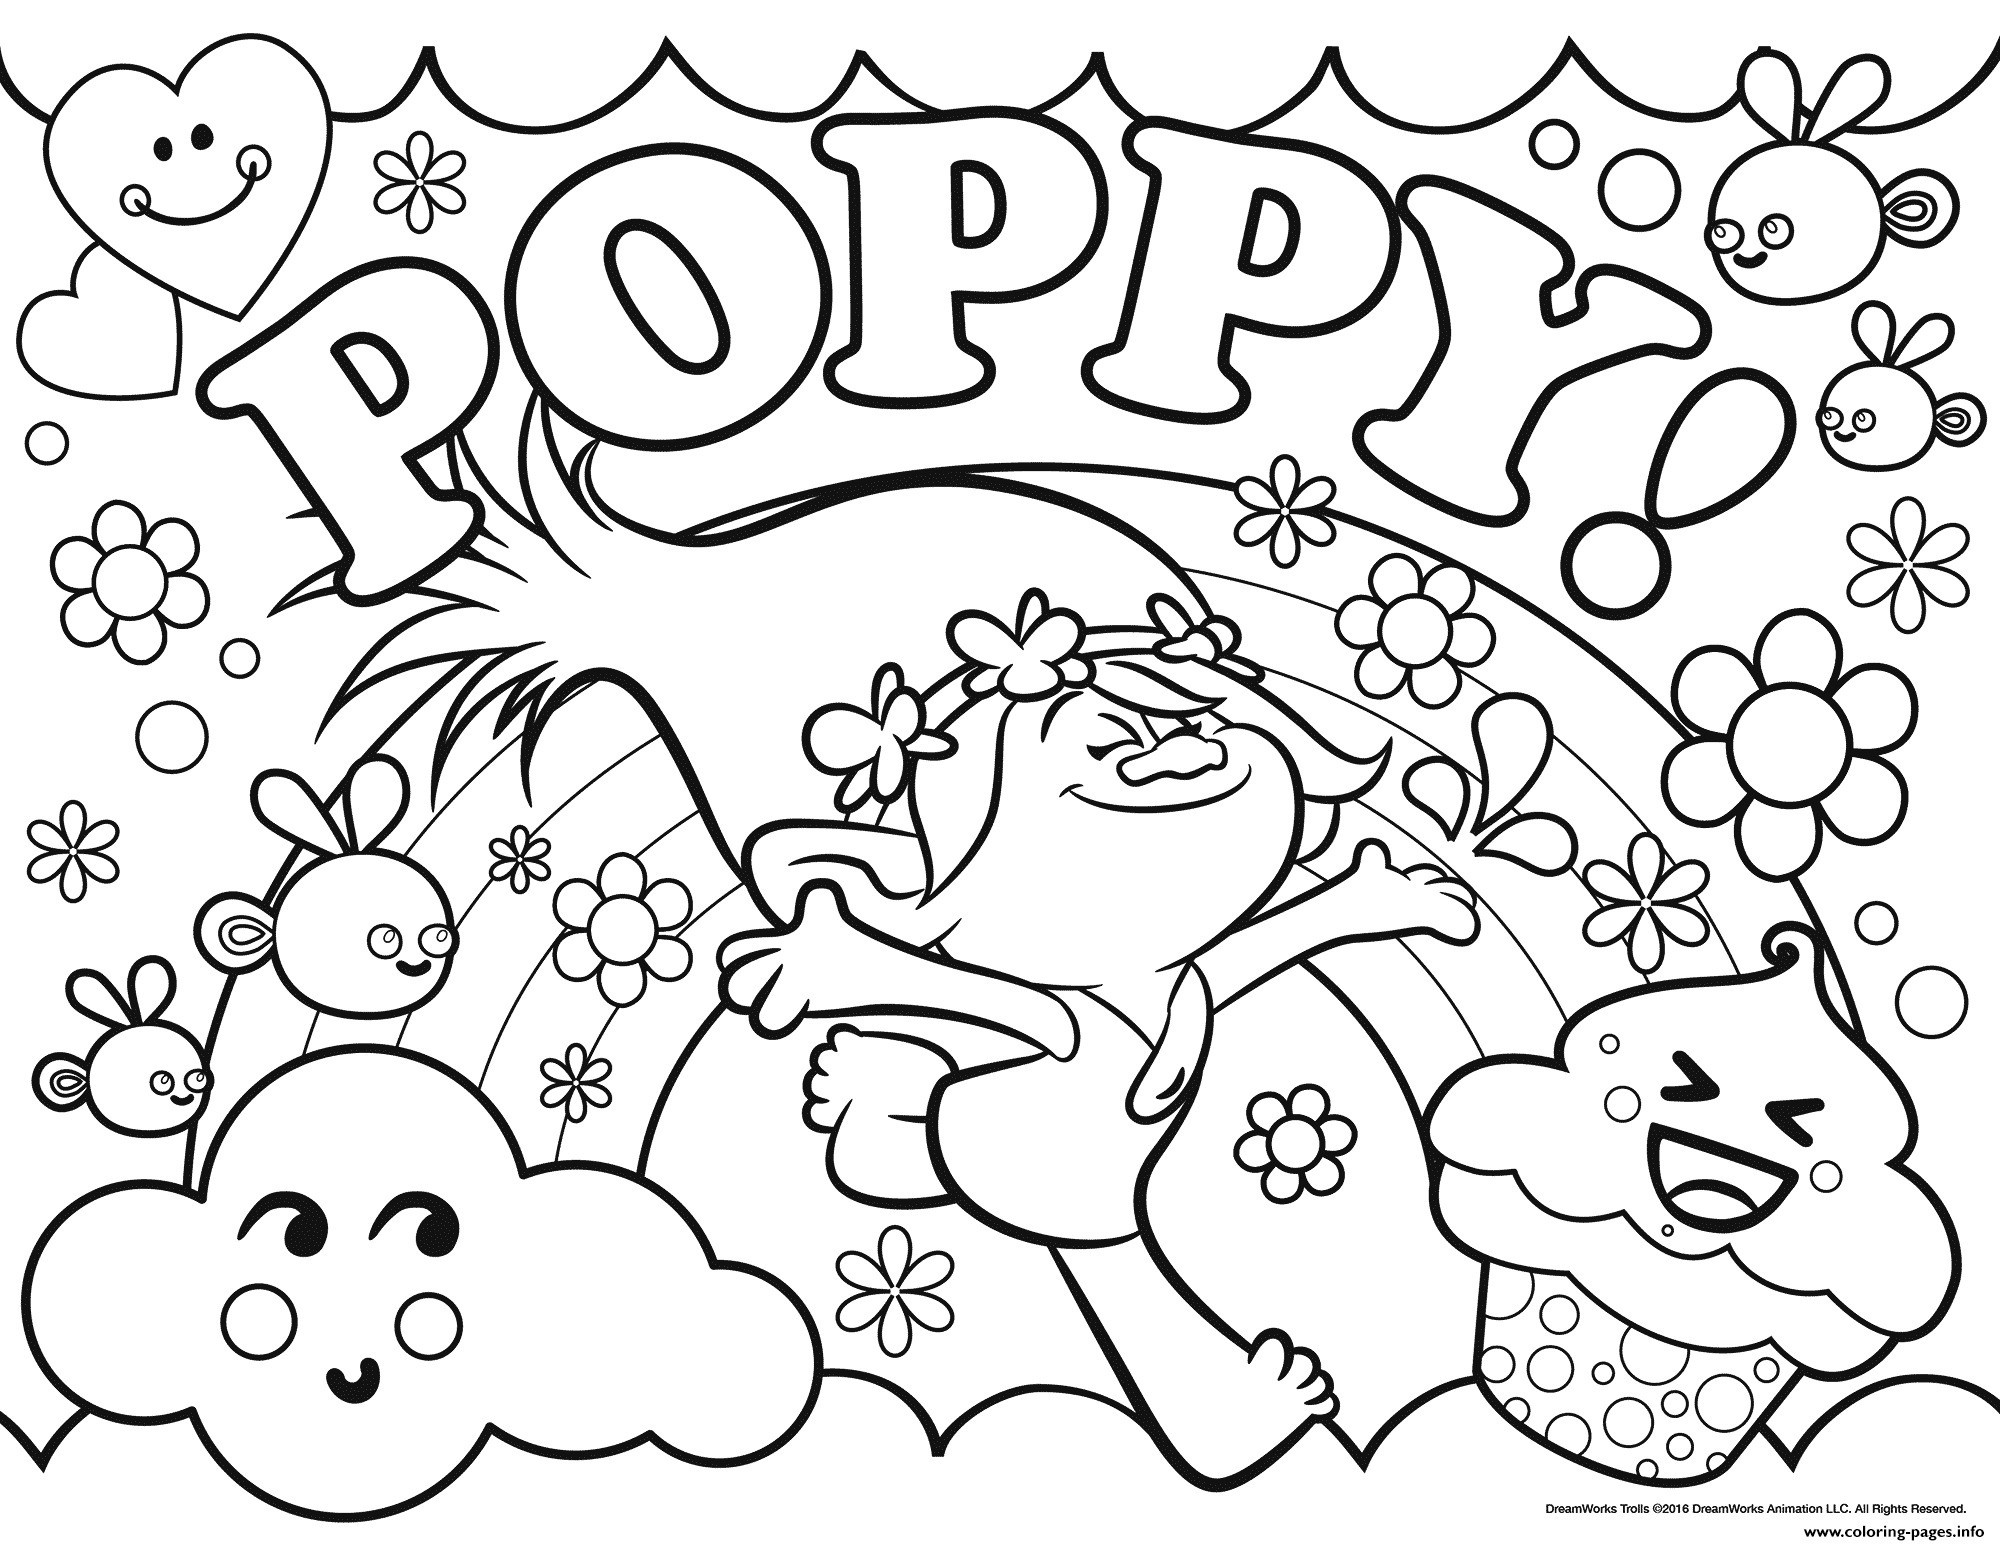 Trolls Coloring Sheets Beautiful Trolls Coloring Pages Heathermarxgallery